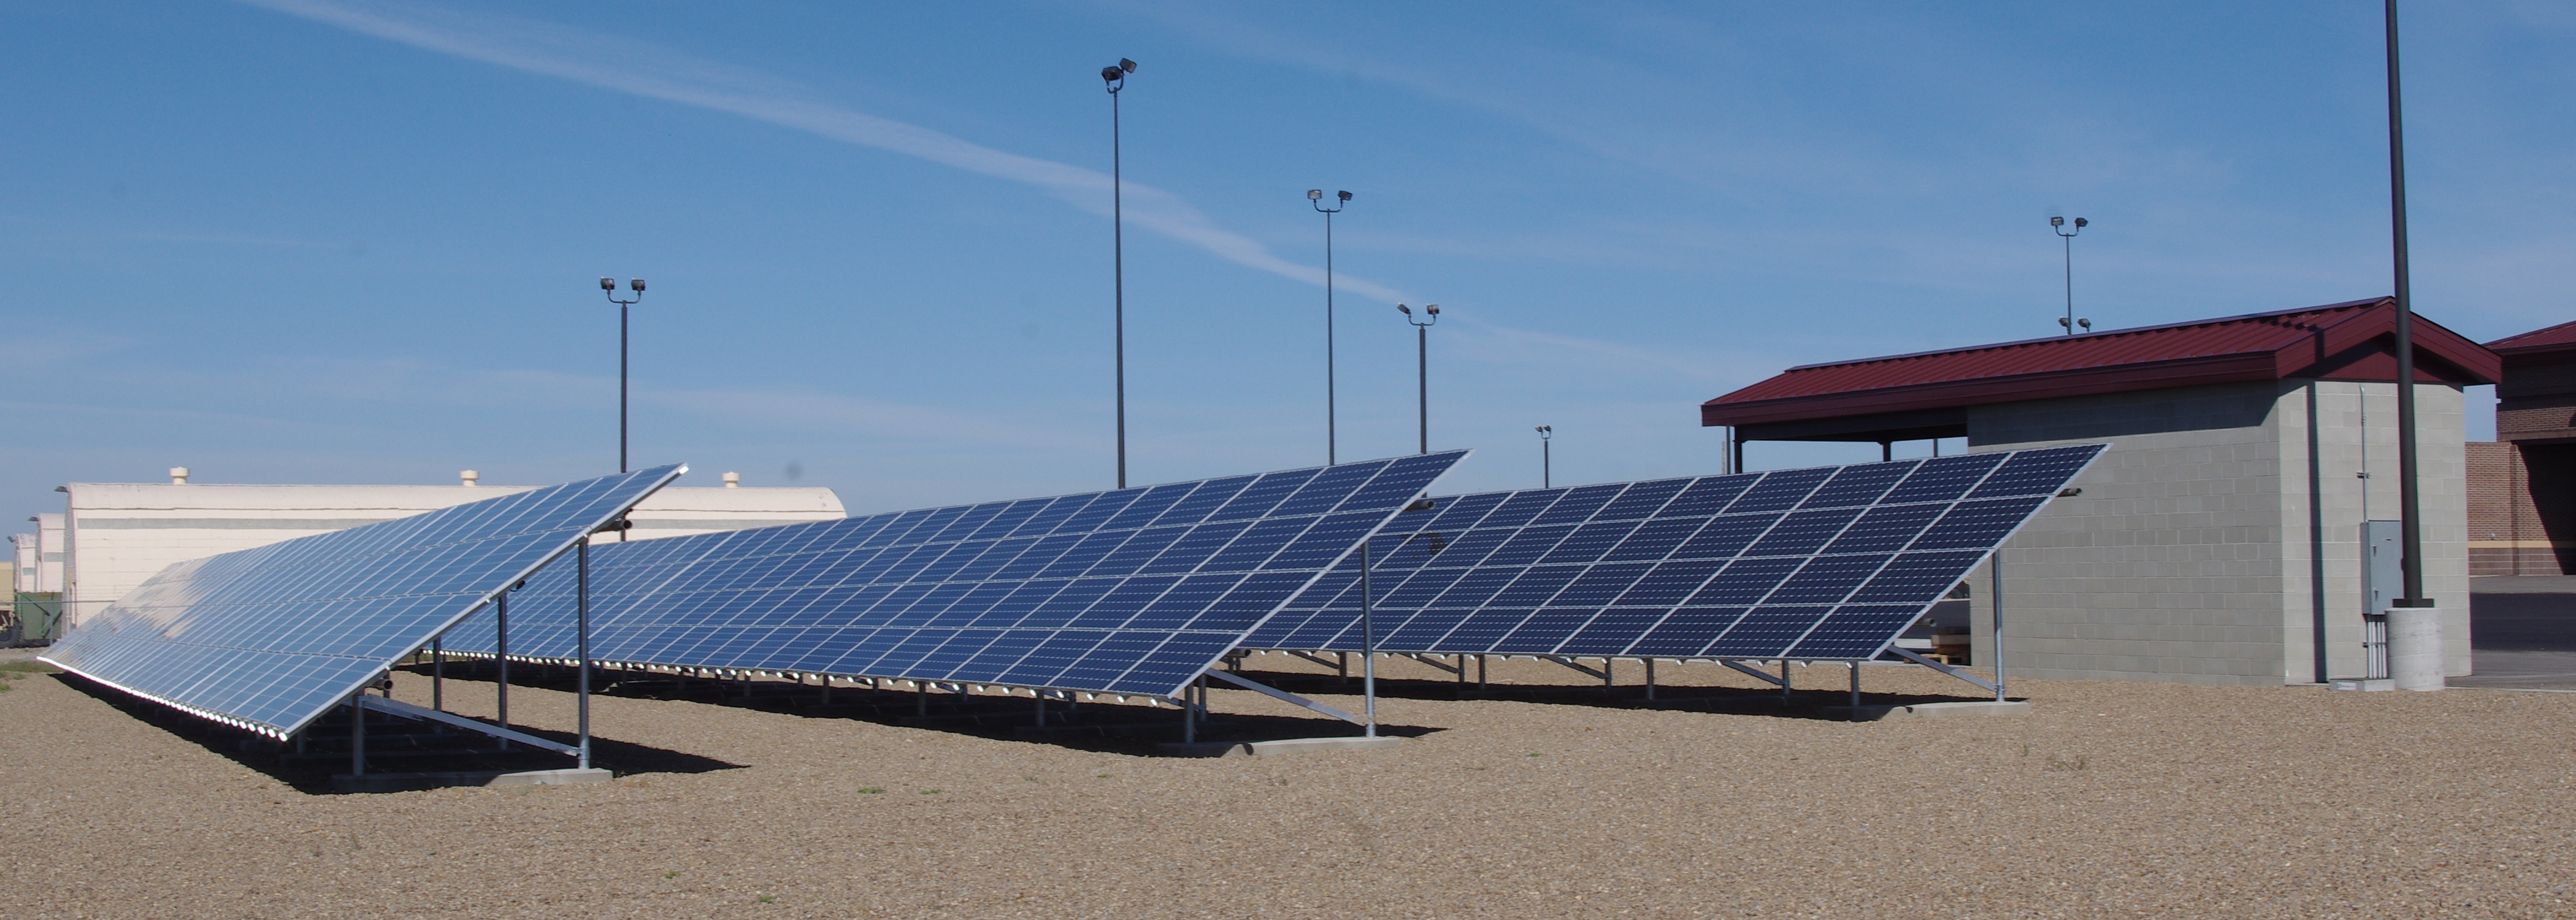 Tactical Unmanned Aerial Support Facility Project Solar Array & Hazmat Facility, Mountain Home, Idaho